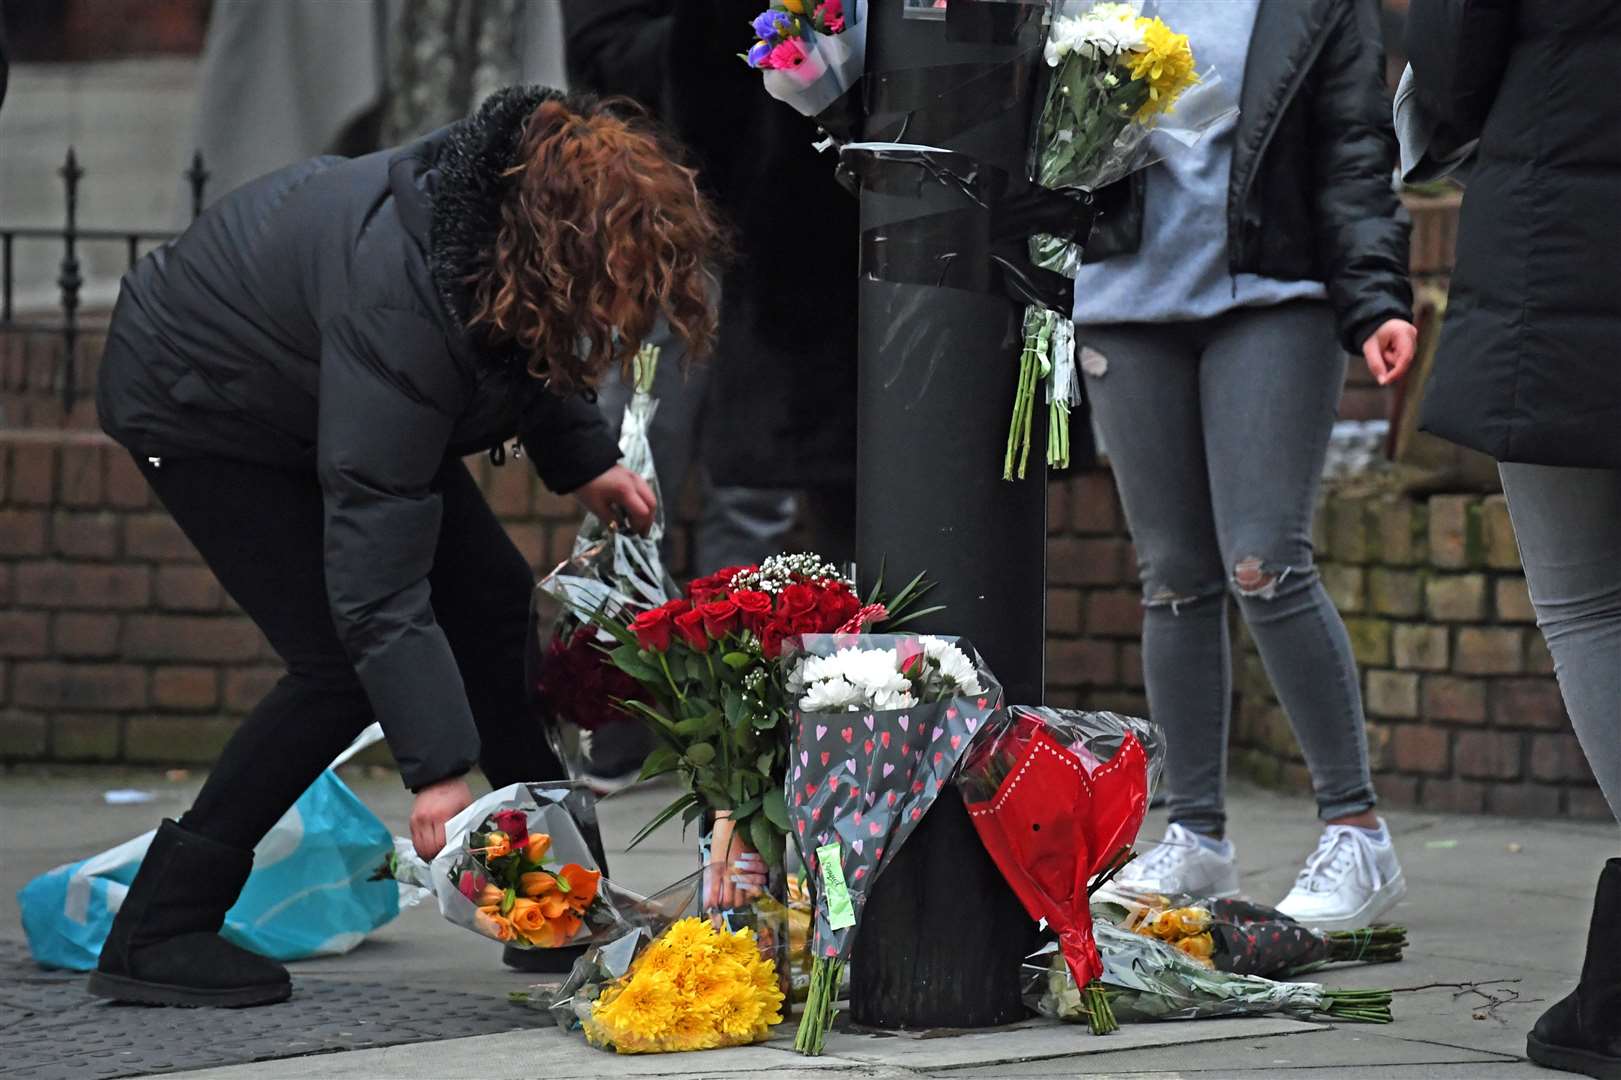 Floral tributes were left at the scene (Kirsty O’Connor/PA)